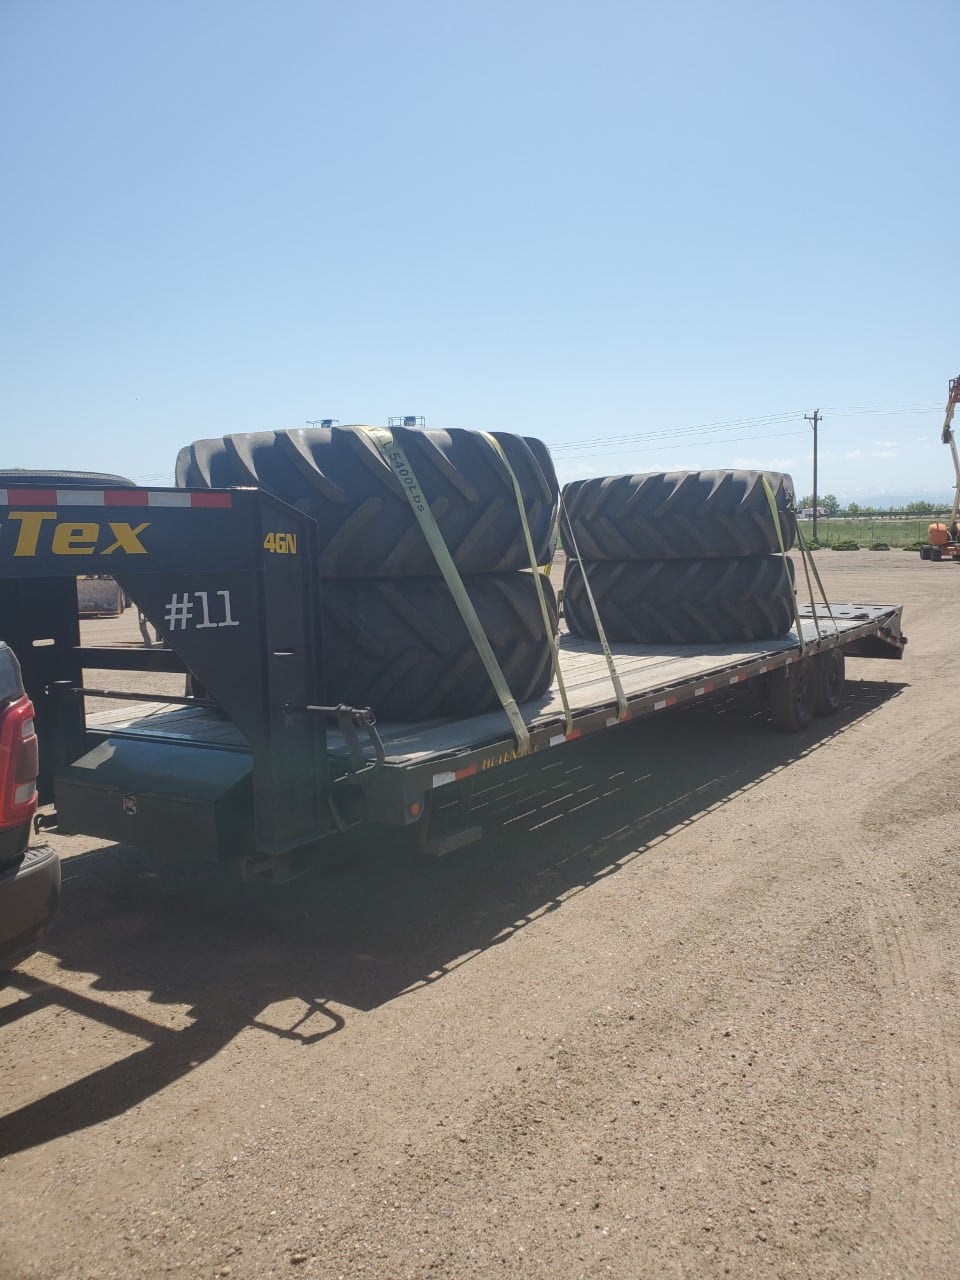 Transporting tractor tires on a hot shot trailer